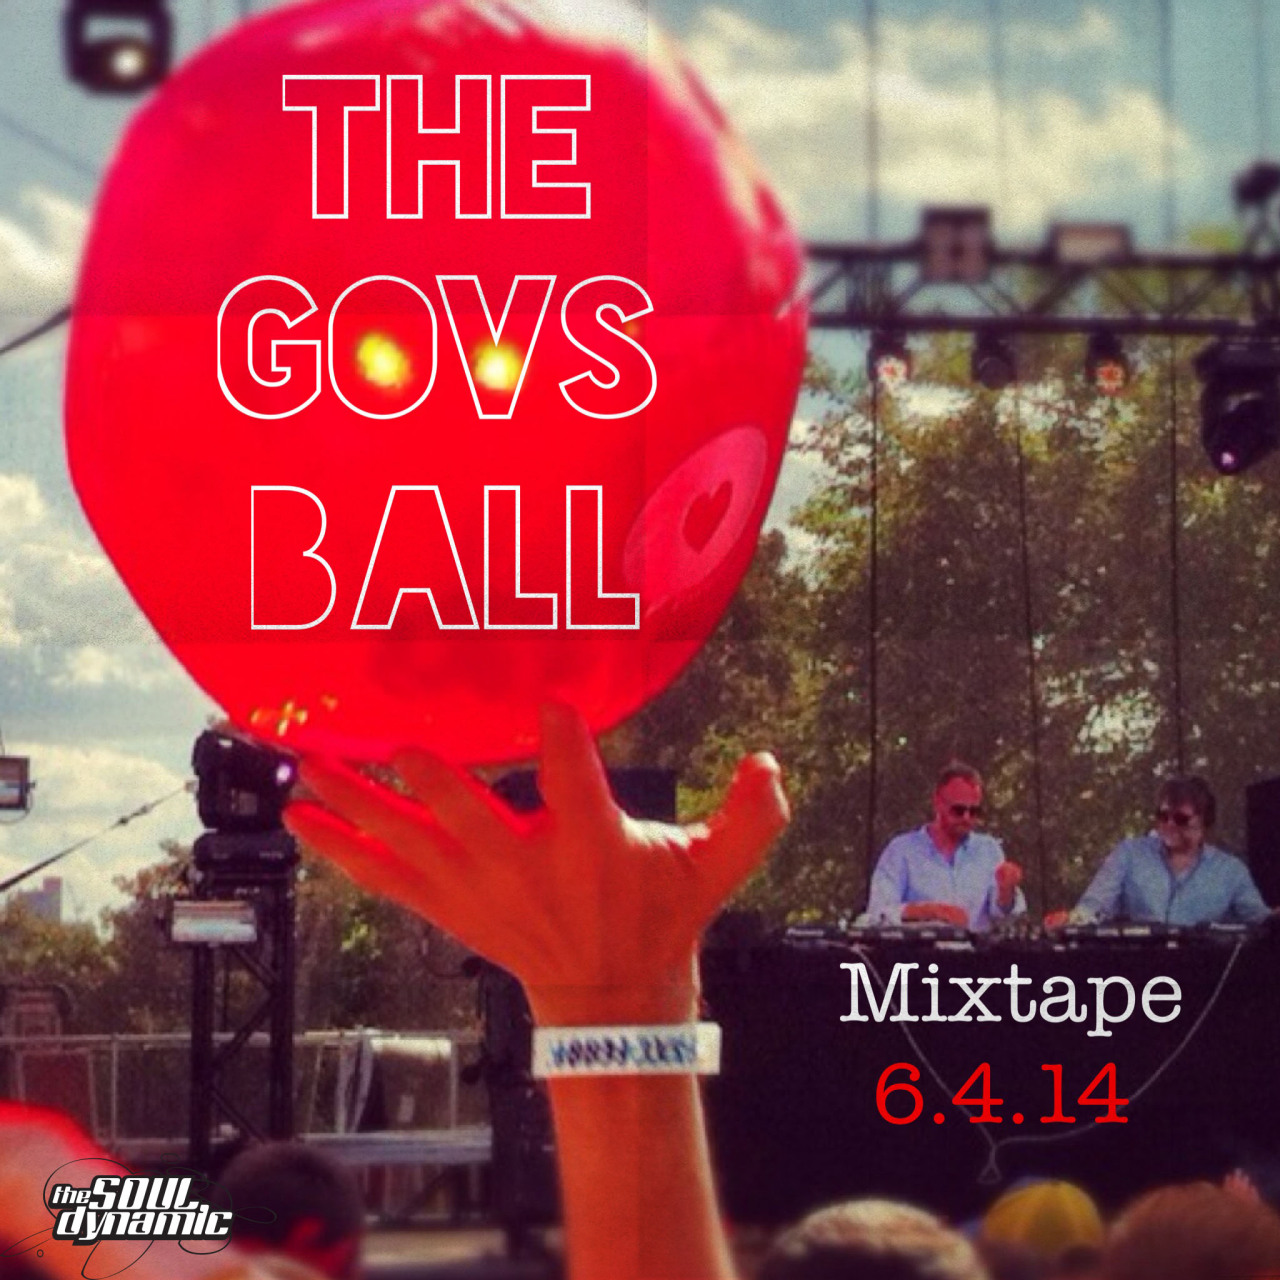 2014 Gov&#8217;s Ball Mixtape | Tuesday MixtapeThe GOVS Ball MIXTAPE | 6.4.14</p> <p>Well folks, it&#8217;s that special time of year again. The time for unwrapping those gifts from under the tree, sipping on the freshest of eggnog dranks and joining in celebration of little baby Jesus asleep in the manger. Yes my friends—Christmas is finally here!</p> <p>Wait, shit. That holiday is still half a year away. Apologies, sometimes we get lost in the euphoric feelings that Governors Ball brings to the table. The sentiment is real&#8230;similar. Anyway, the premier New York City music festival is back for it&#8217;s fourth go around and in the spirit of gaining legitimacy—think the proper way to say this is—isn&#8217;t fucking around.</p> <p>This year&#8217;s edition brings in the heavyweights Jack White, Vampire Weekend, Outkast and Interpol, to jam out with risers Earl Sweatshirt, Ratking and Lucious among others. As always is the case, we&#8217;re here for you in your time of summer party need to provide professional documentation of this spectacular. And now ladies and gents, our mixtape: </p> <p>2014 GOVS Ball Mixtape | A Soul Dynamic Playlist</p> <p>Click here or above to listen to our Mixtape via Spotify.